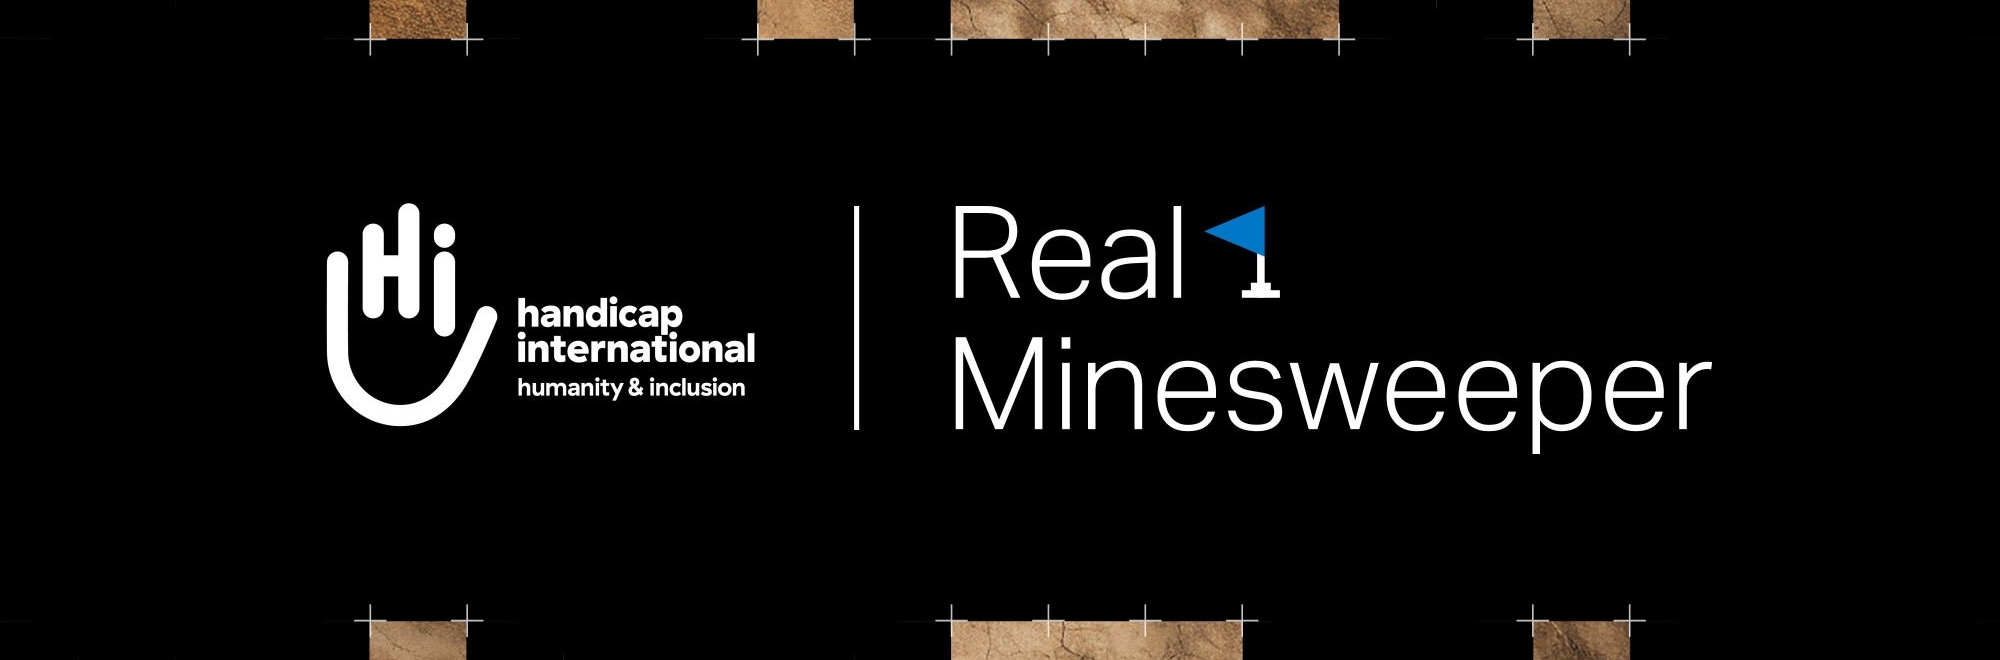 Handicap International recreates the iconic Minesweeper game to help innocent victims of landmines